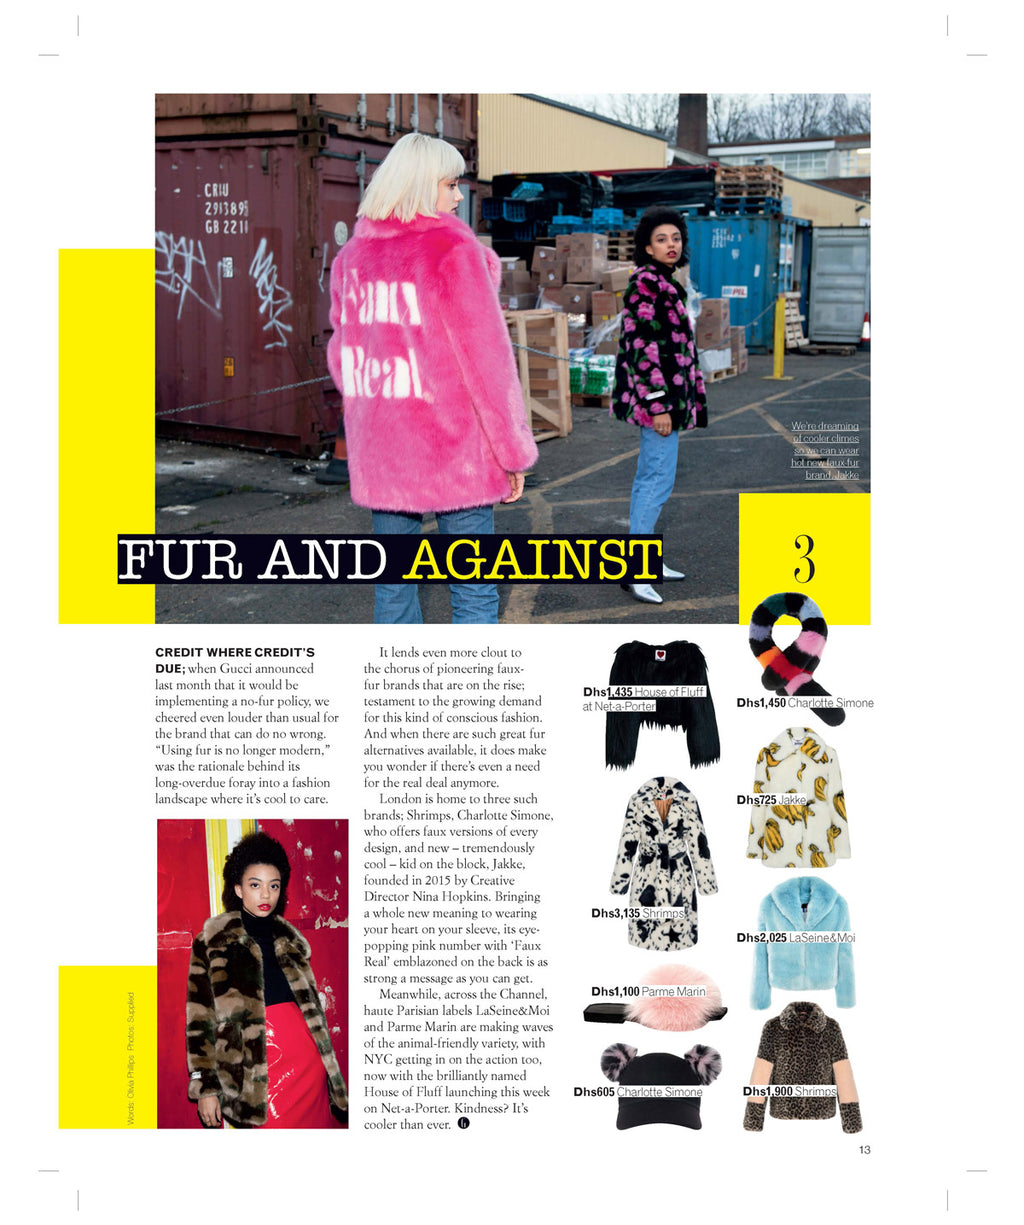 Grazia Middle East